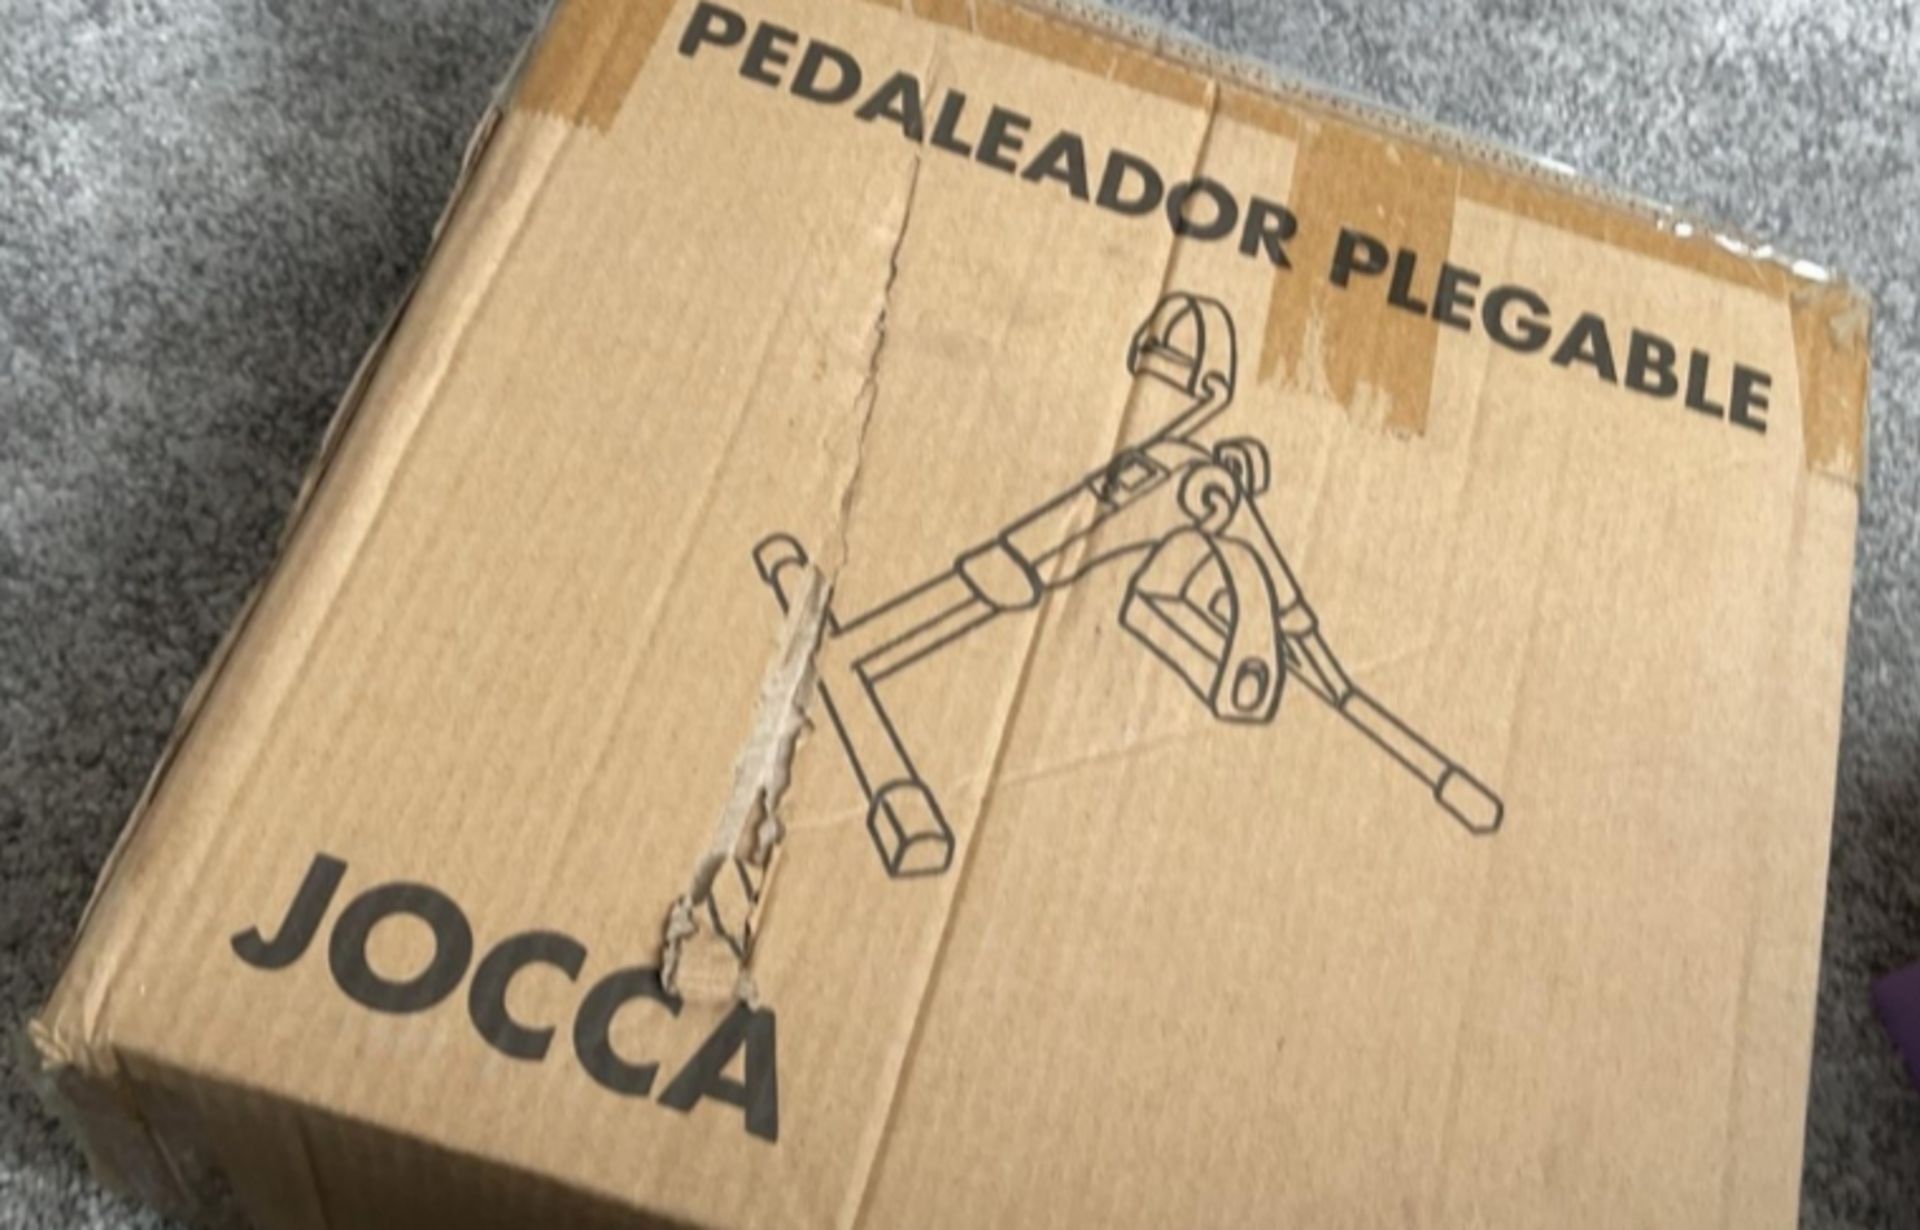 Jocca Pedal Exerciser - New & Boxed - Image 3 of 3